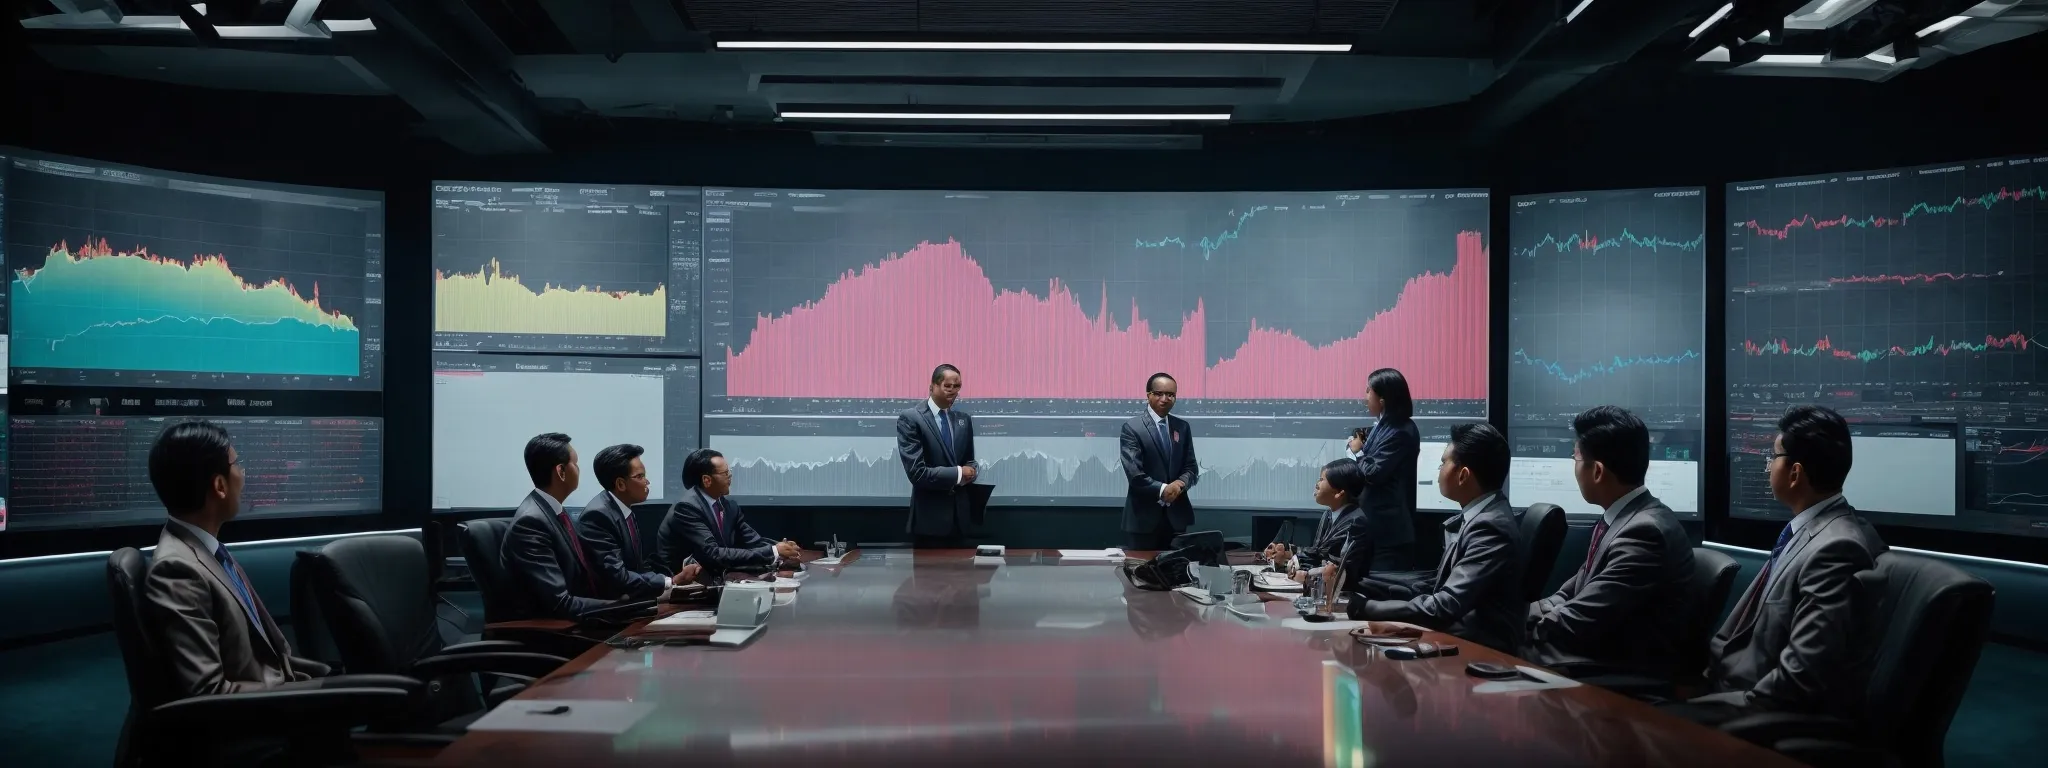 a boardroom with a large screen displaying colorful graphs and charts, with business professionals attentively examining the financial data.